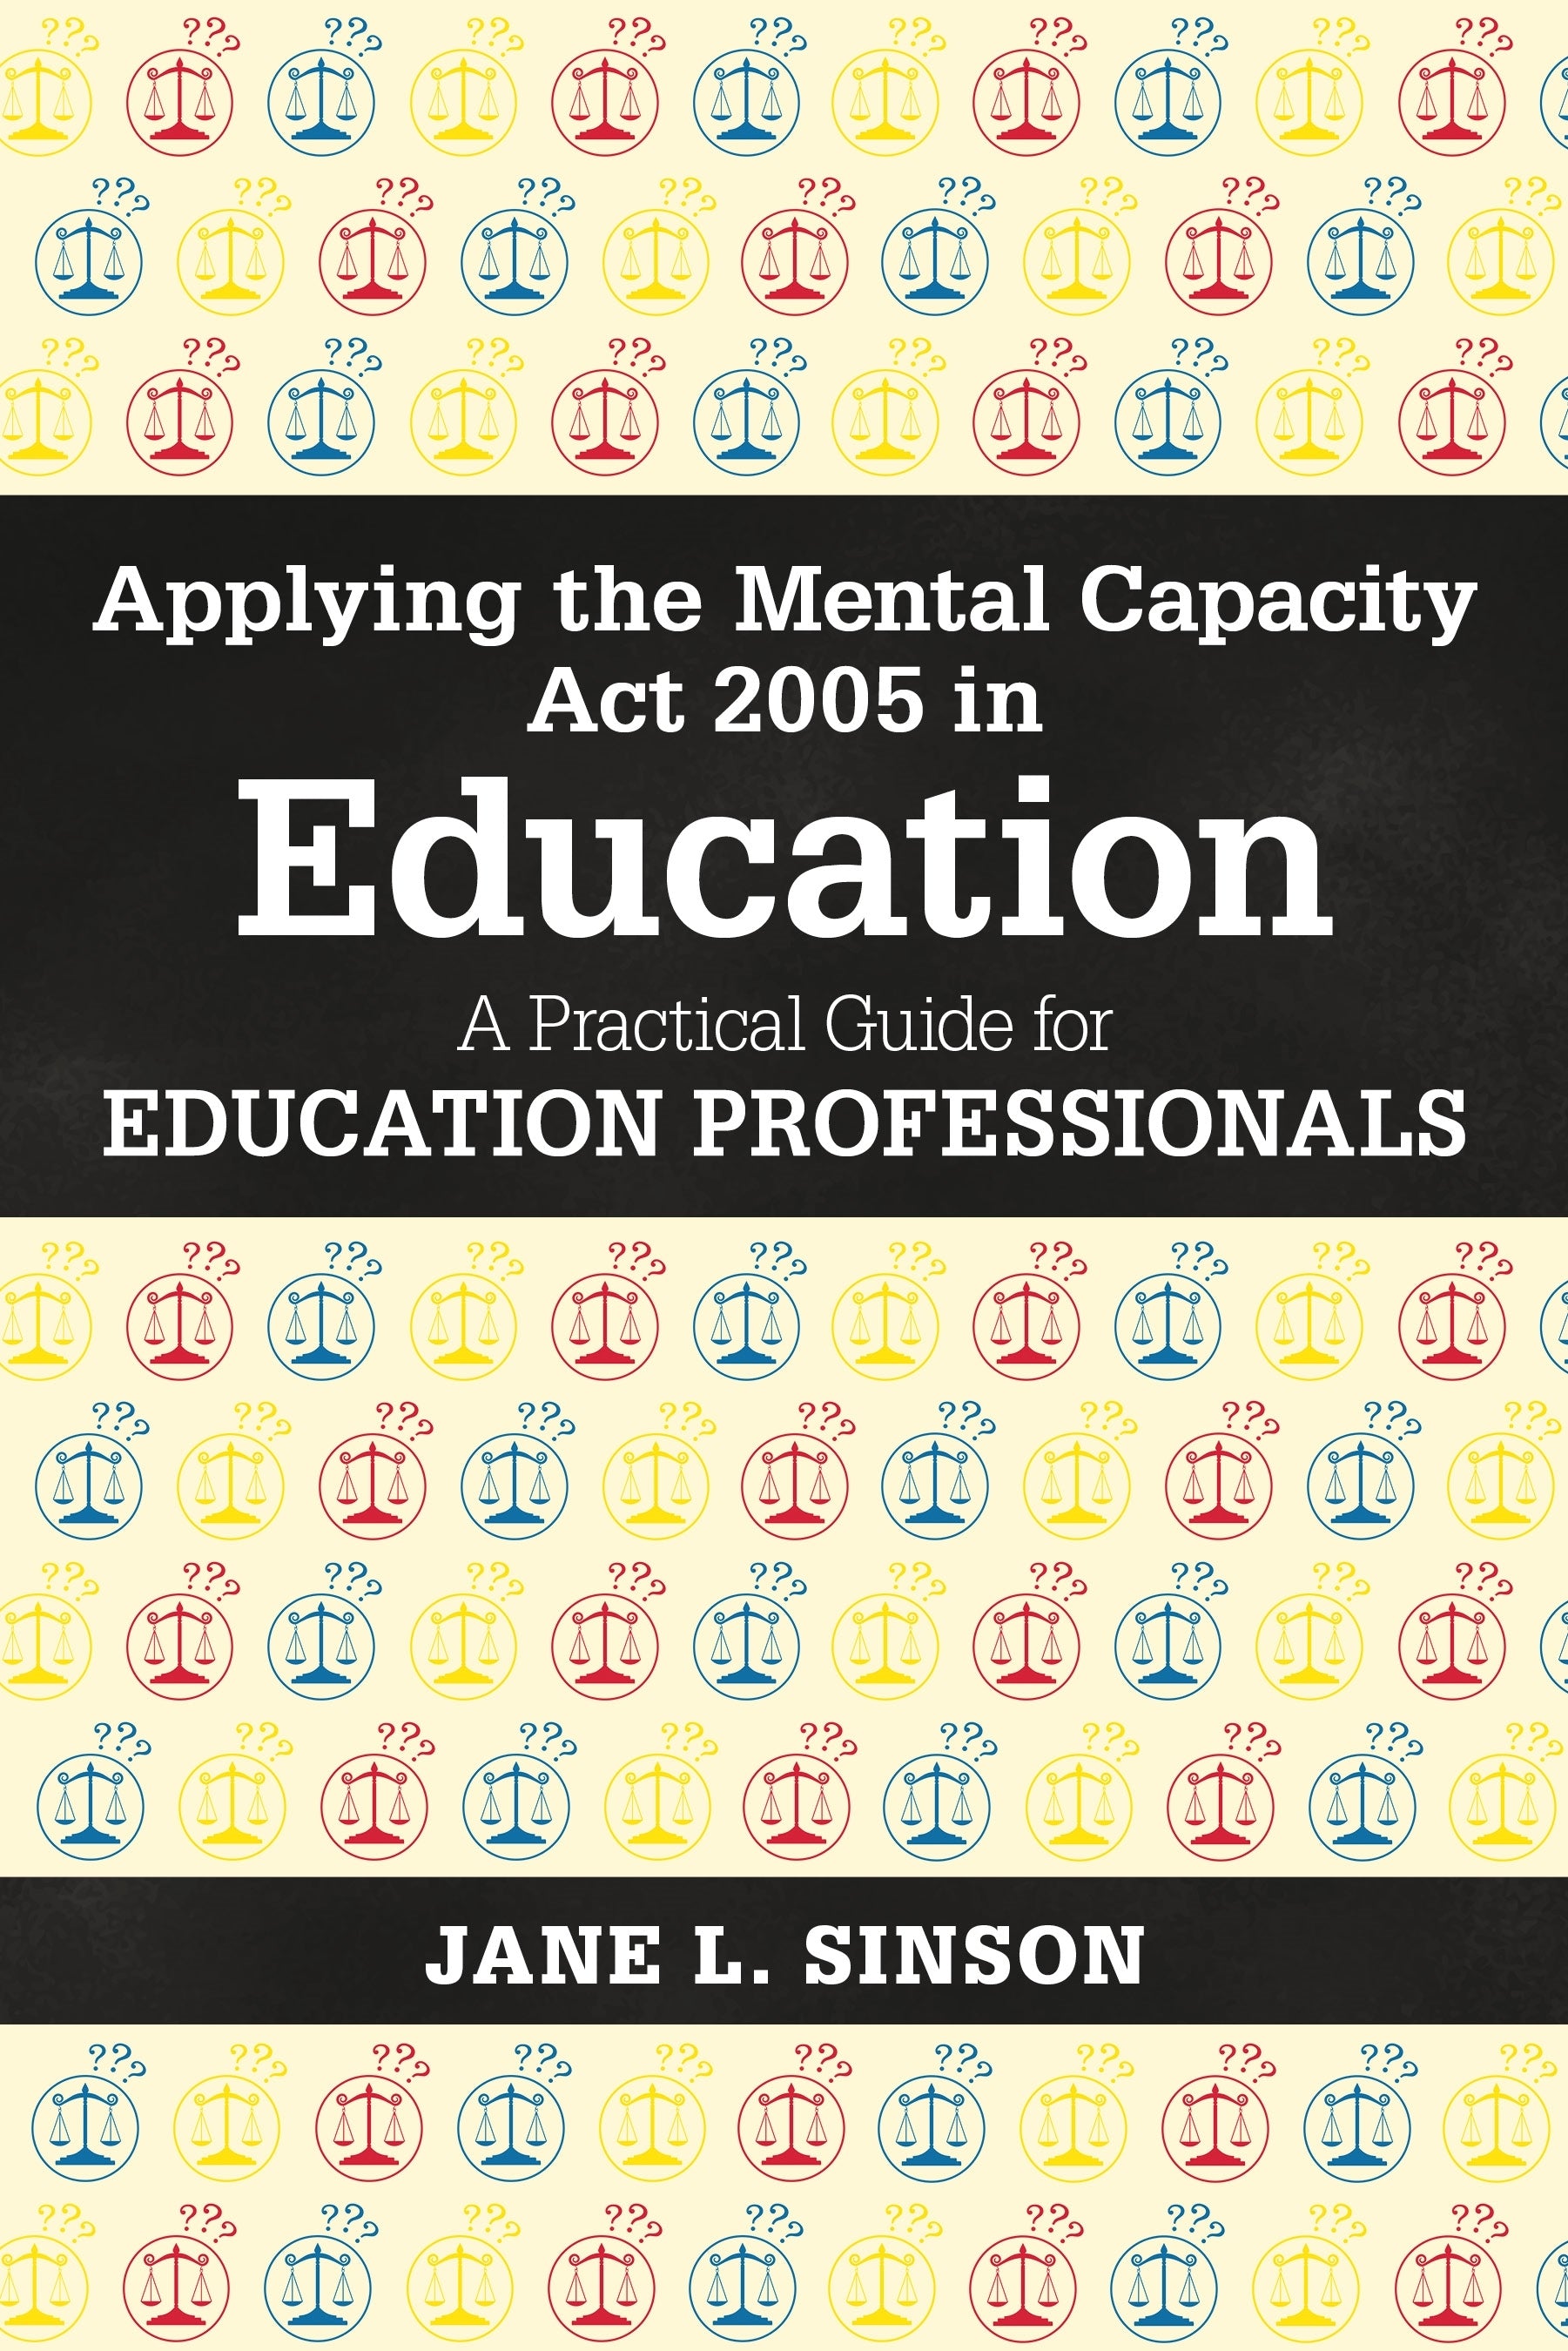 Applying the Mental Capacity Act 2005 in Education by Jane L. Sinson